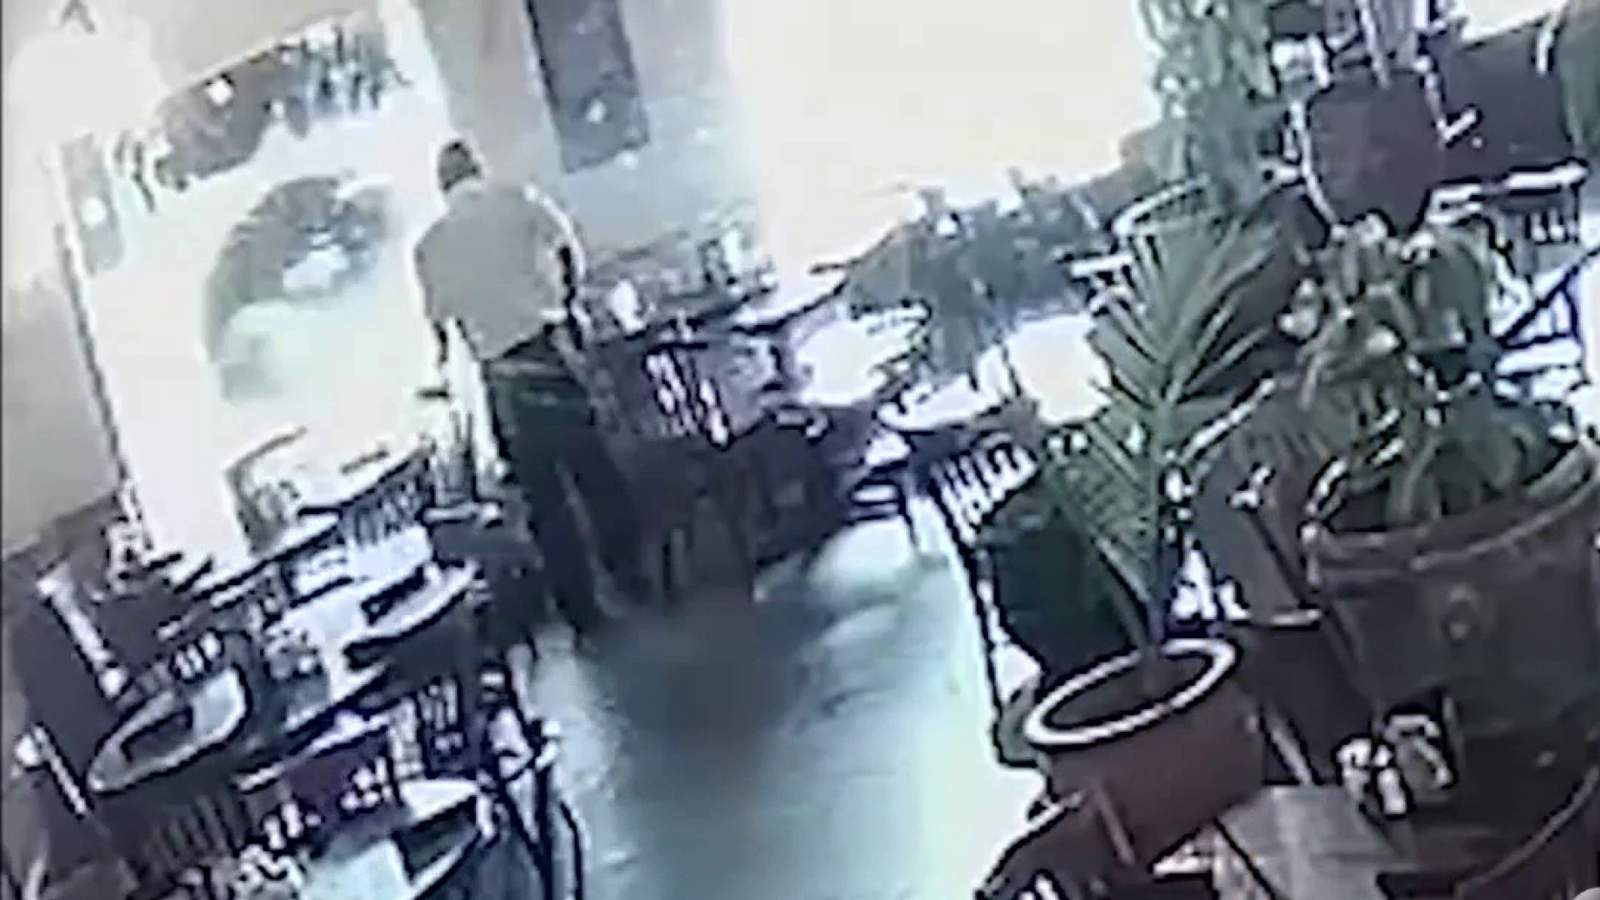 Caught on camera: Tire crashes through window at Texas restaurant, nearly misses employee